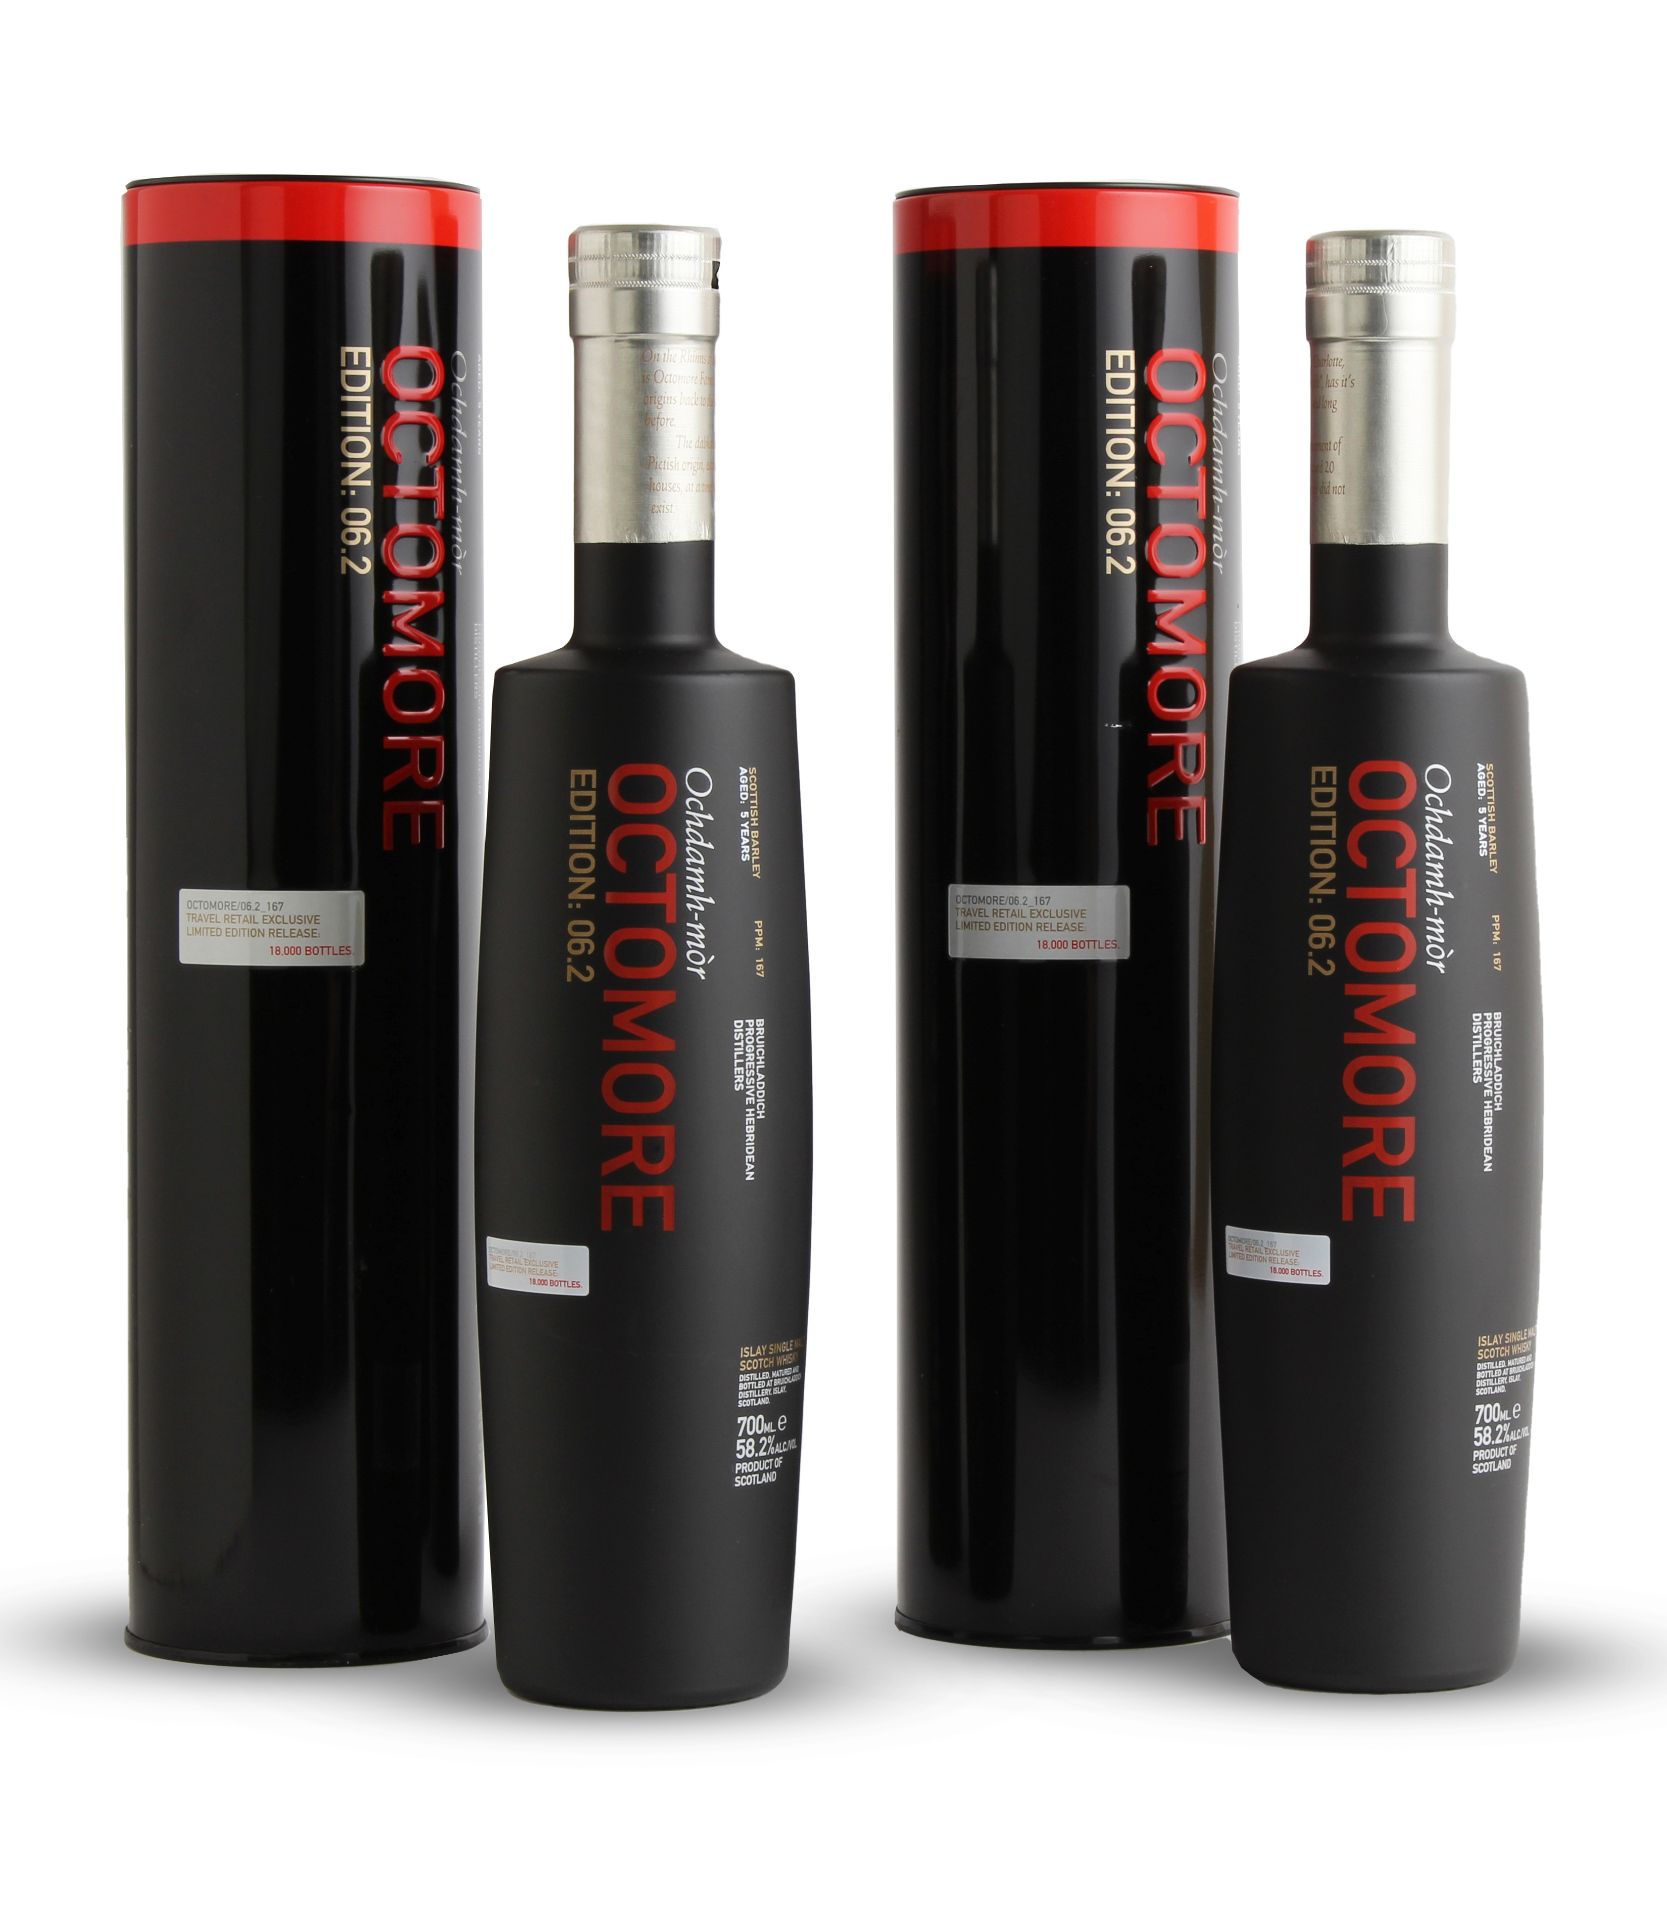 Octomore 6.2-5 year old (4)